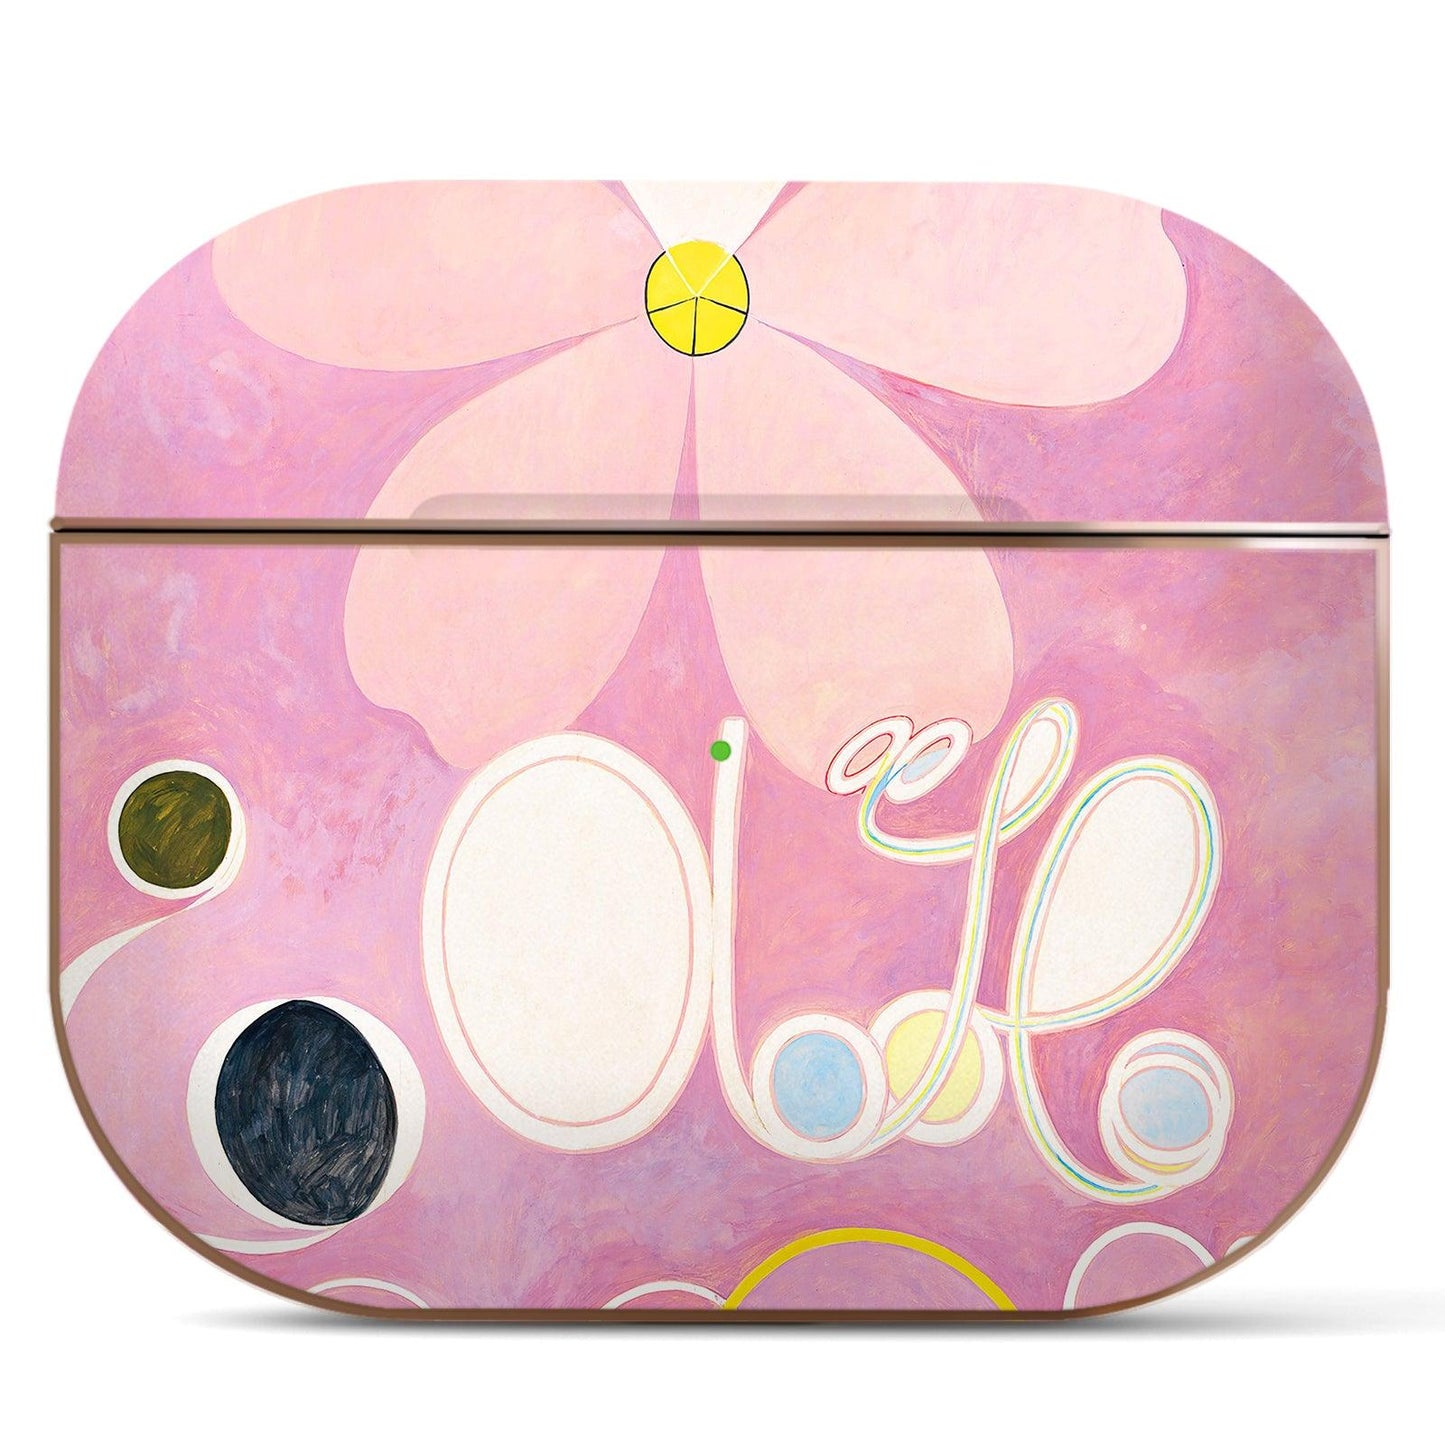 AirPods 3rd Generation Art Flower Cover (The No.5 by Hilma af Klint) - Berkin Arts